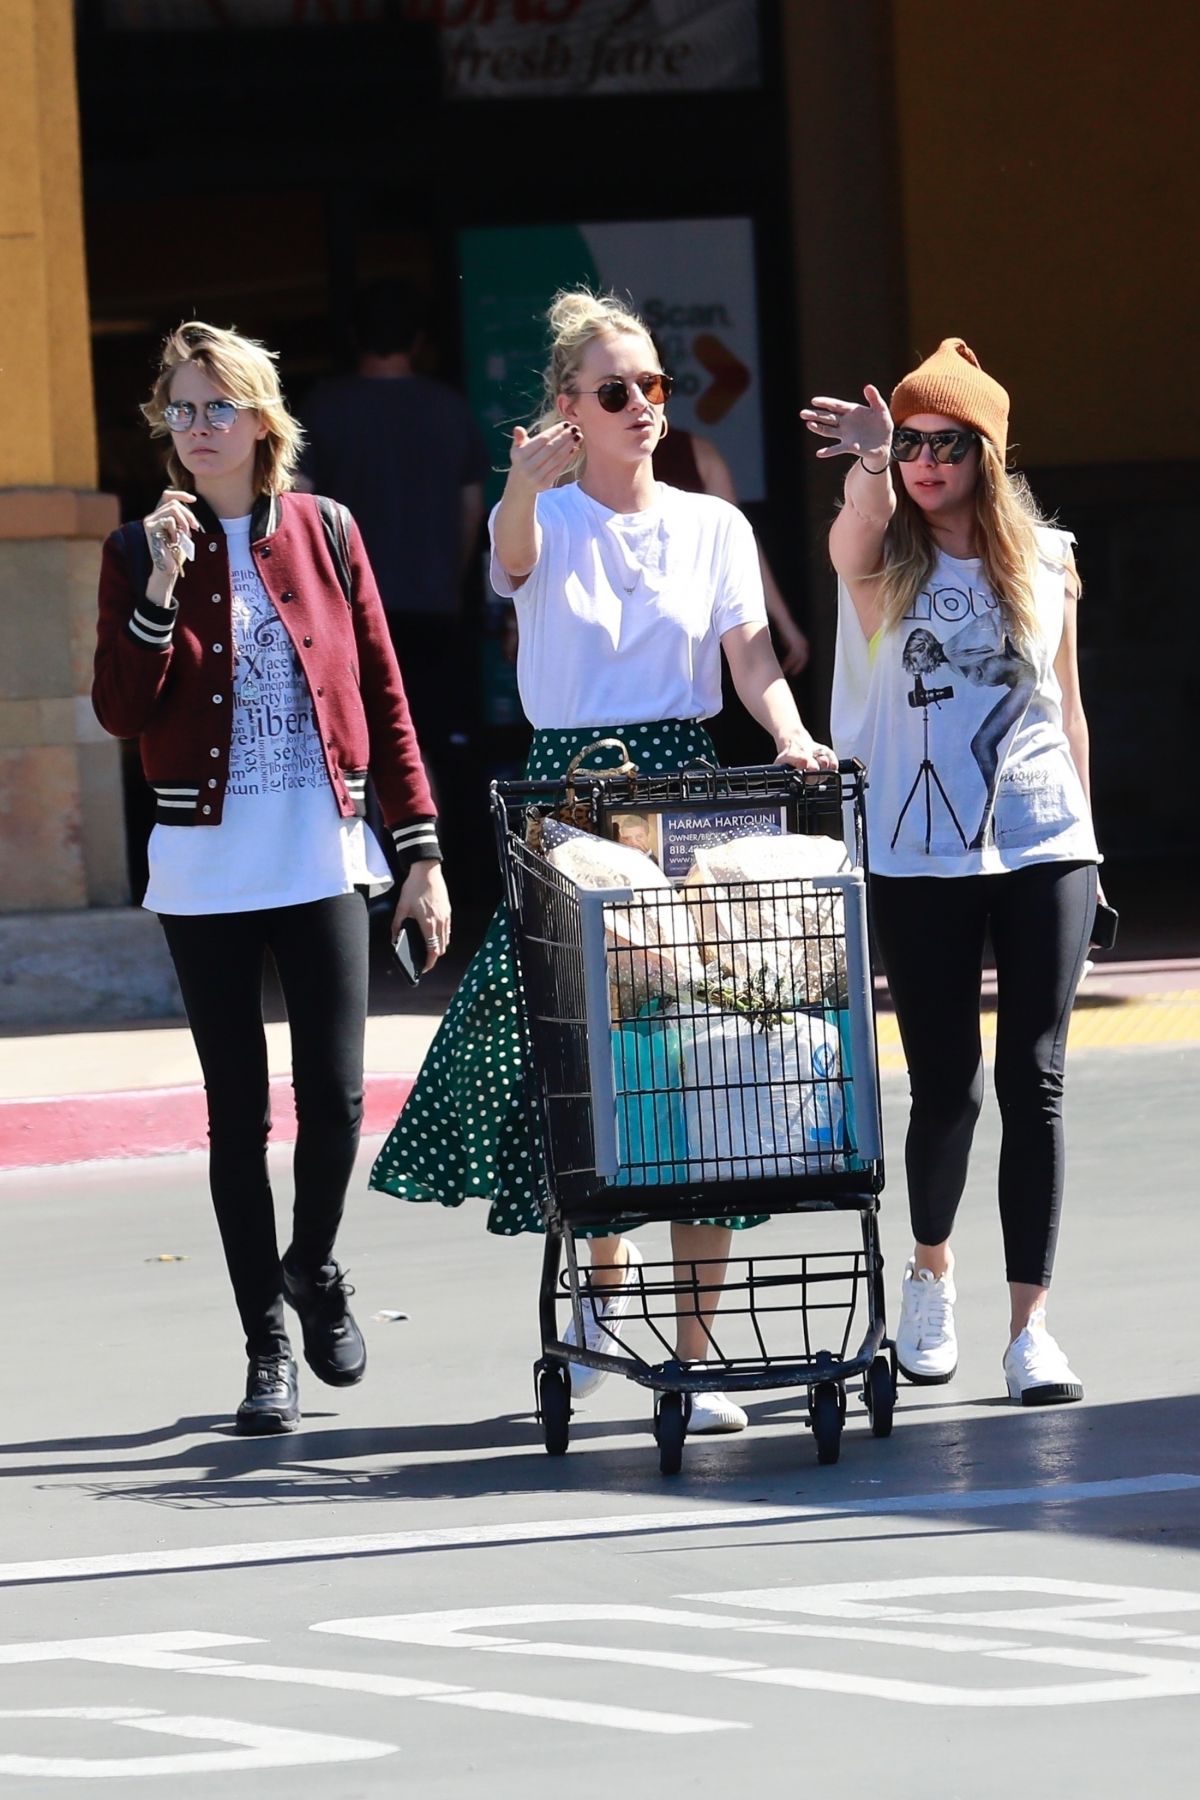 cara-delevingne-and-ashley-benson-out-shopping-in-studio-city-03-16-2019-2.jpg